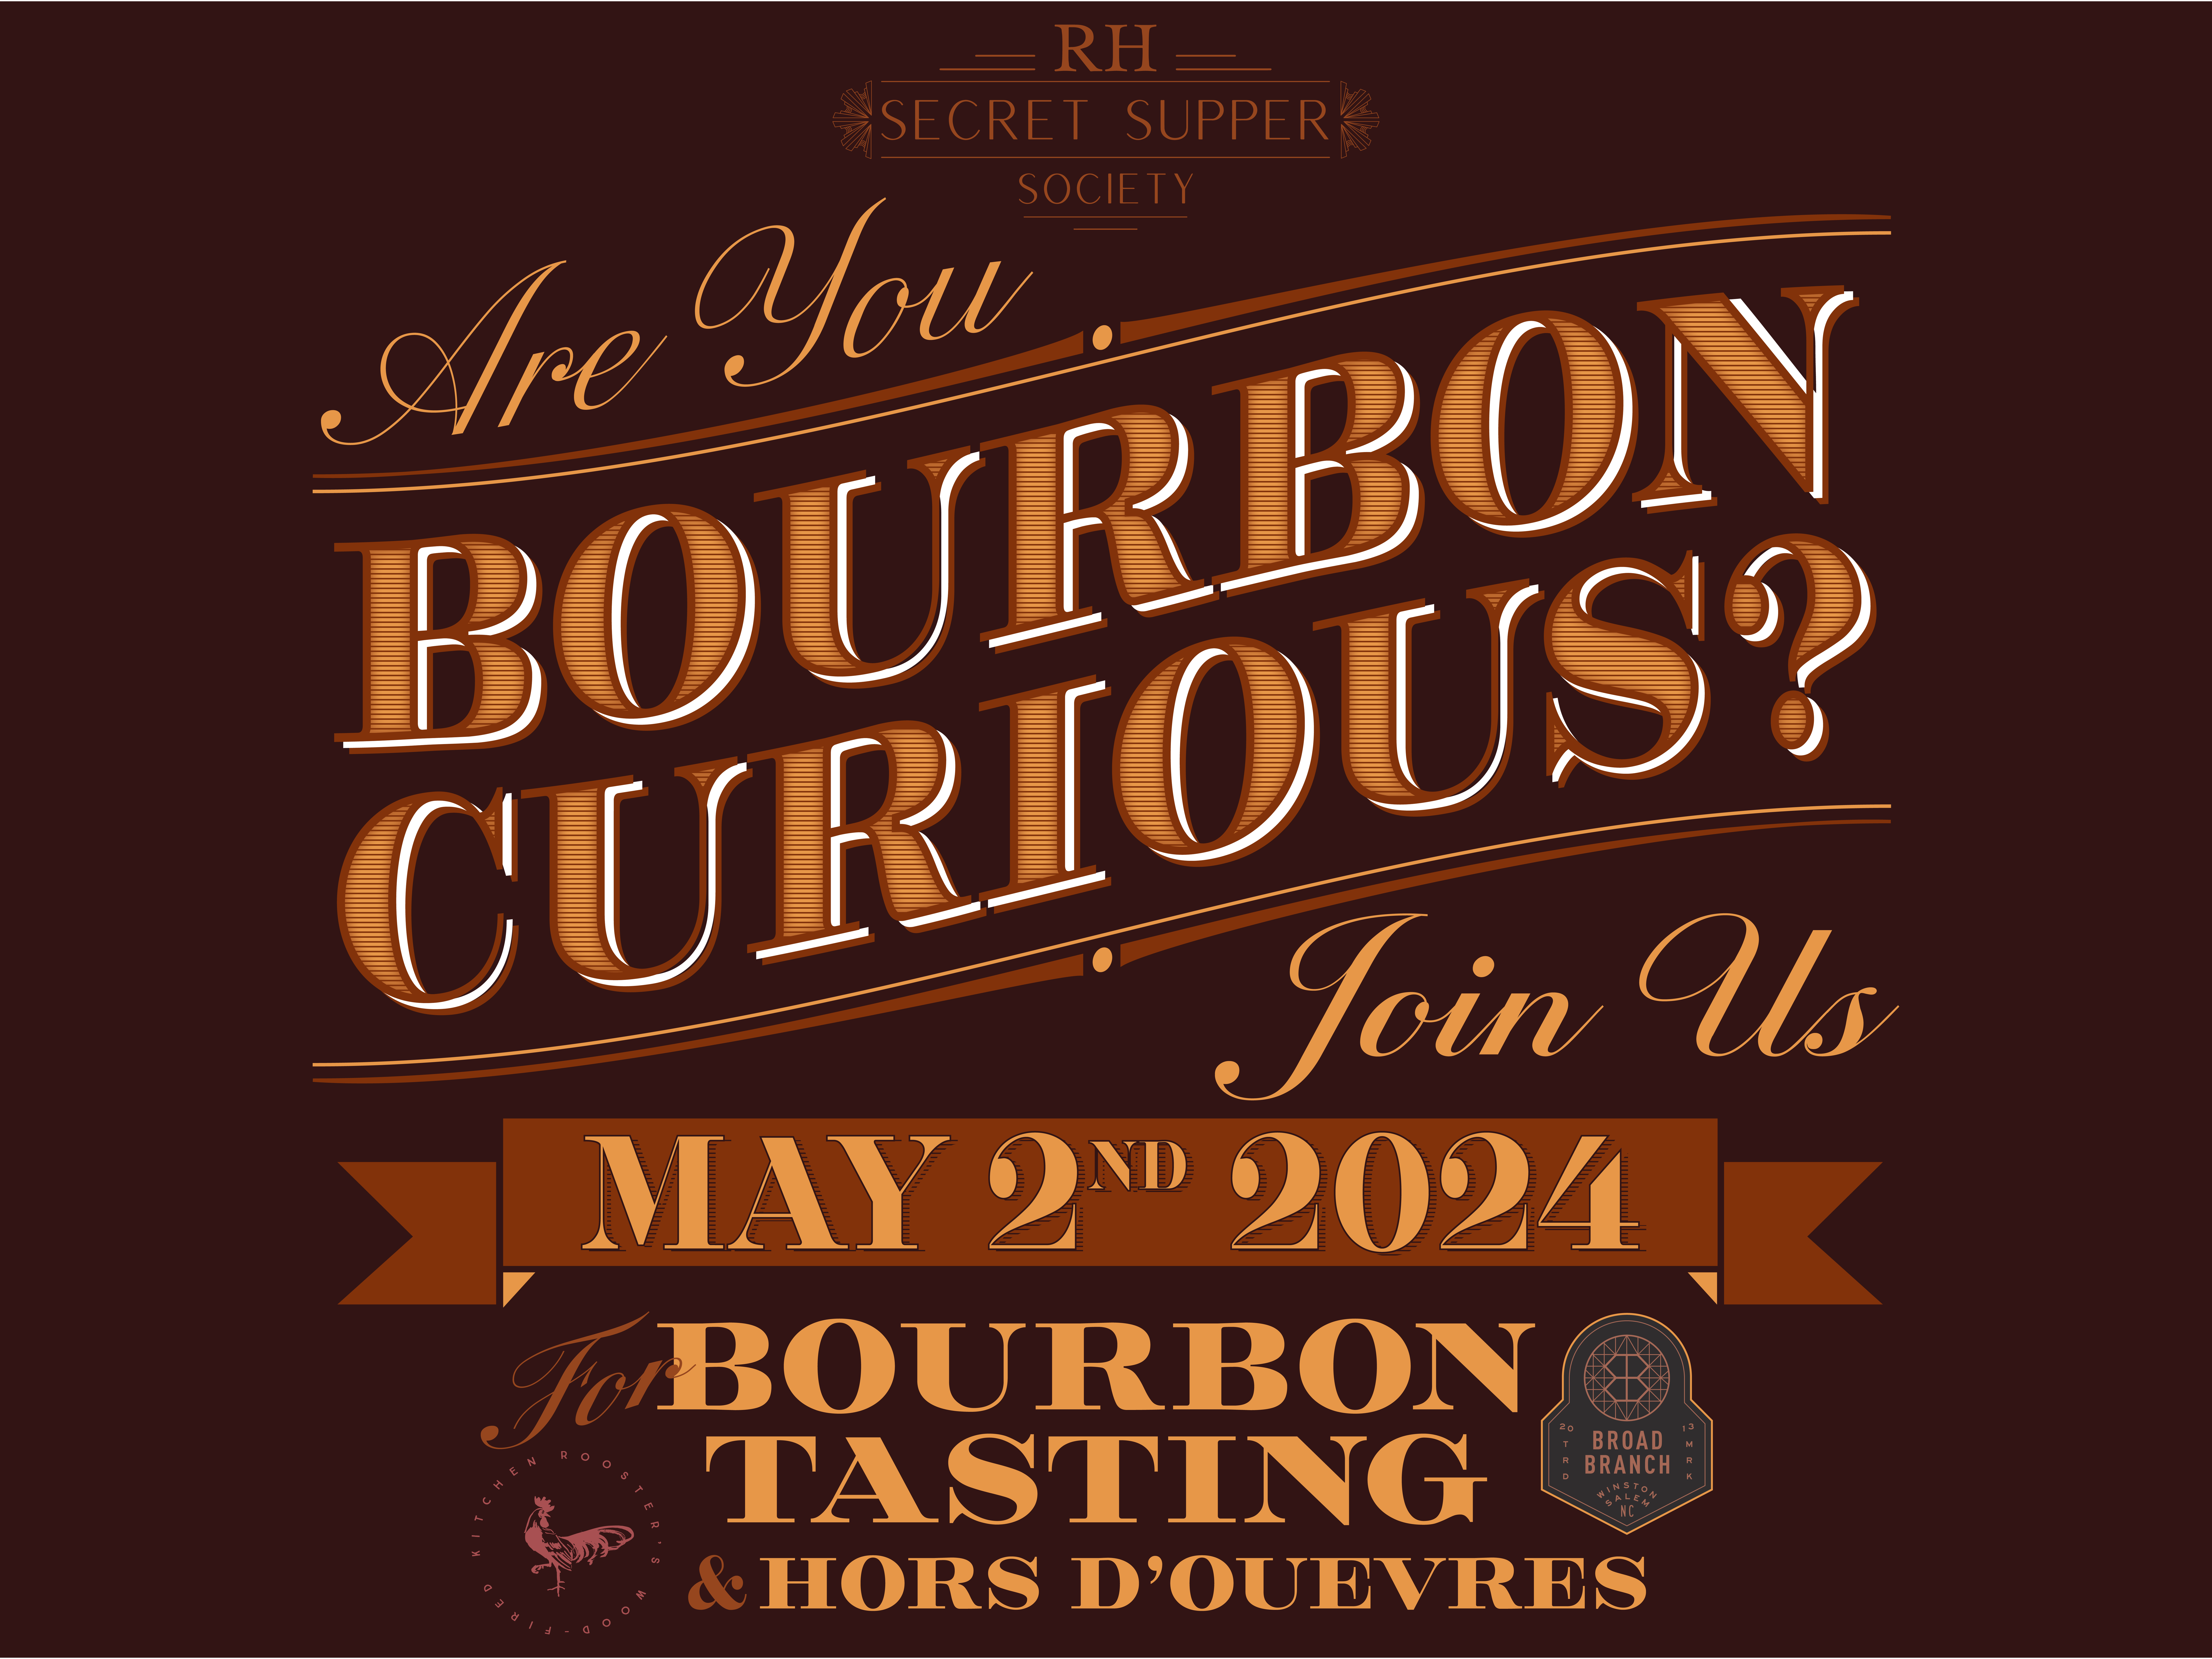 Join the Robert Hall Secret Supper Society for a Bourbon Tasting